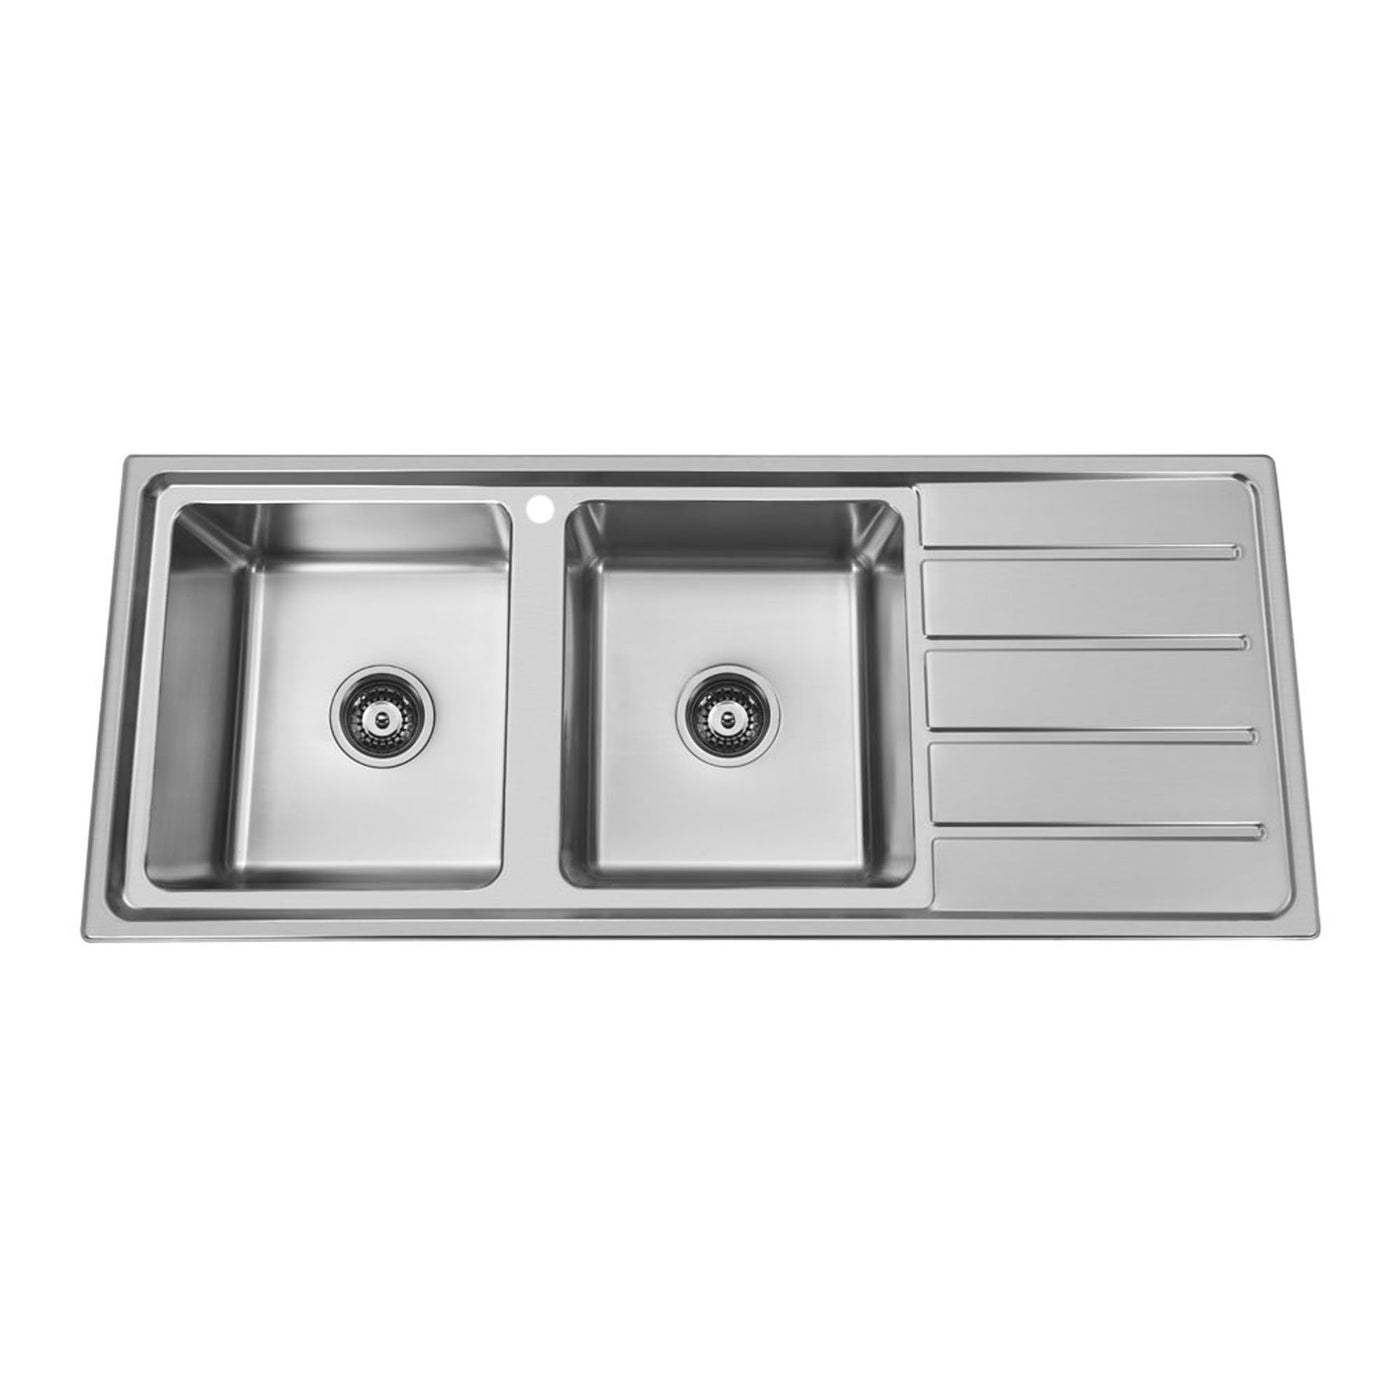 Ground Double Bowl Sink Square Corner 1Th